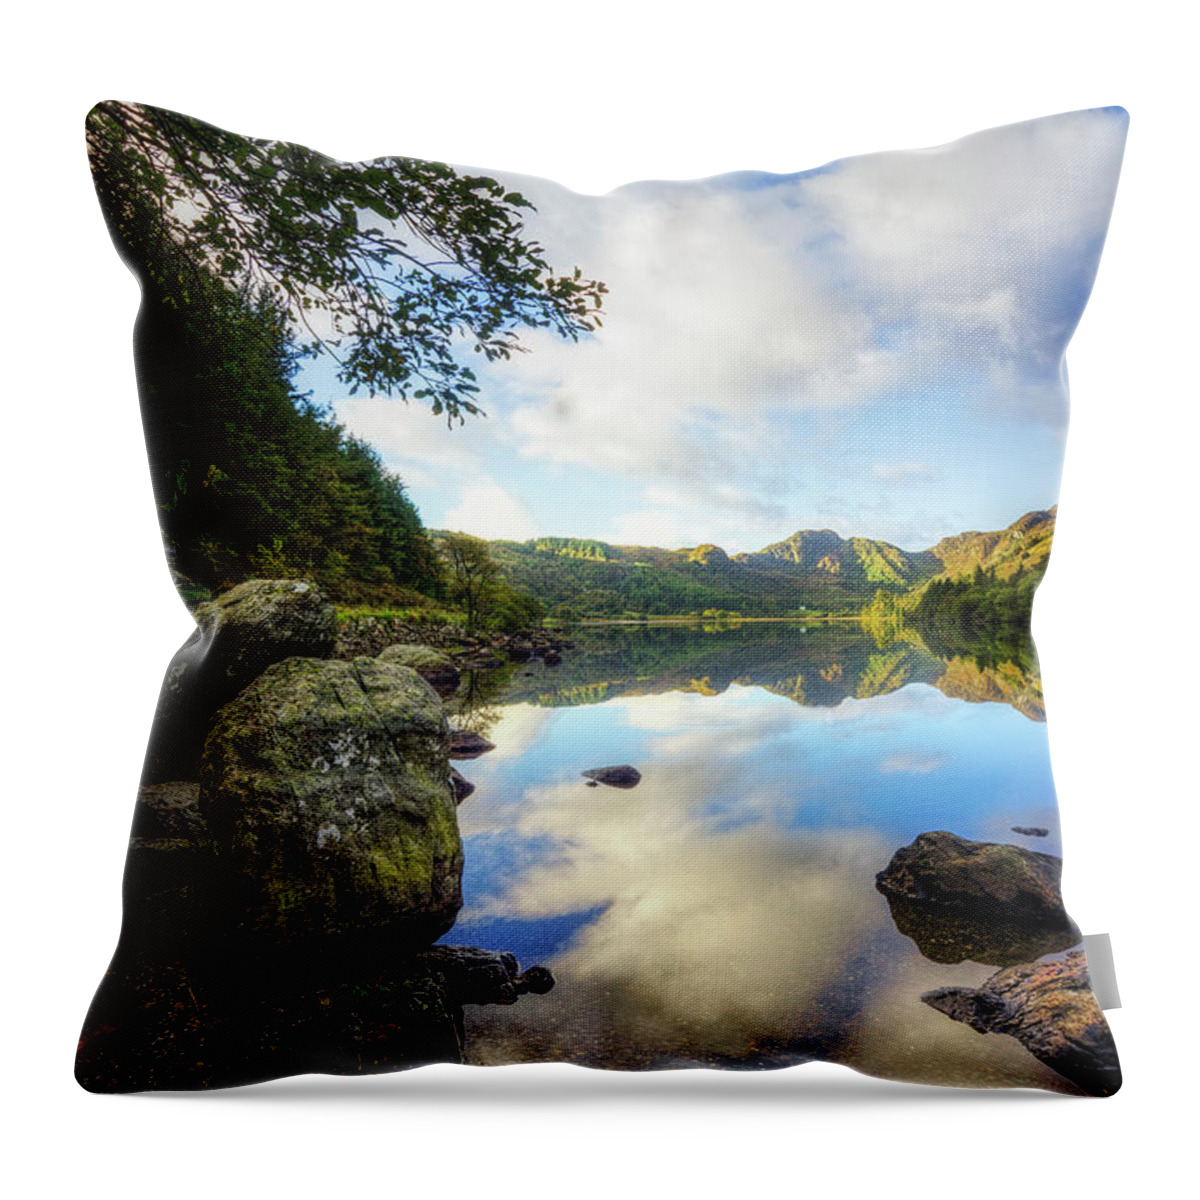 Snowdonia Throw Pillow featuring the photograph Llyn Crafnant #3 by Ian Mitchell